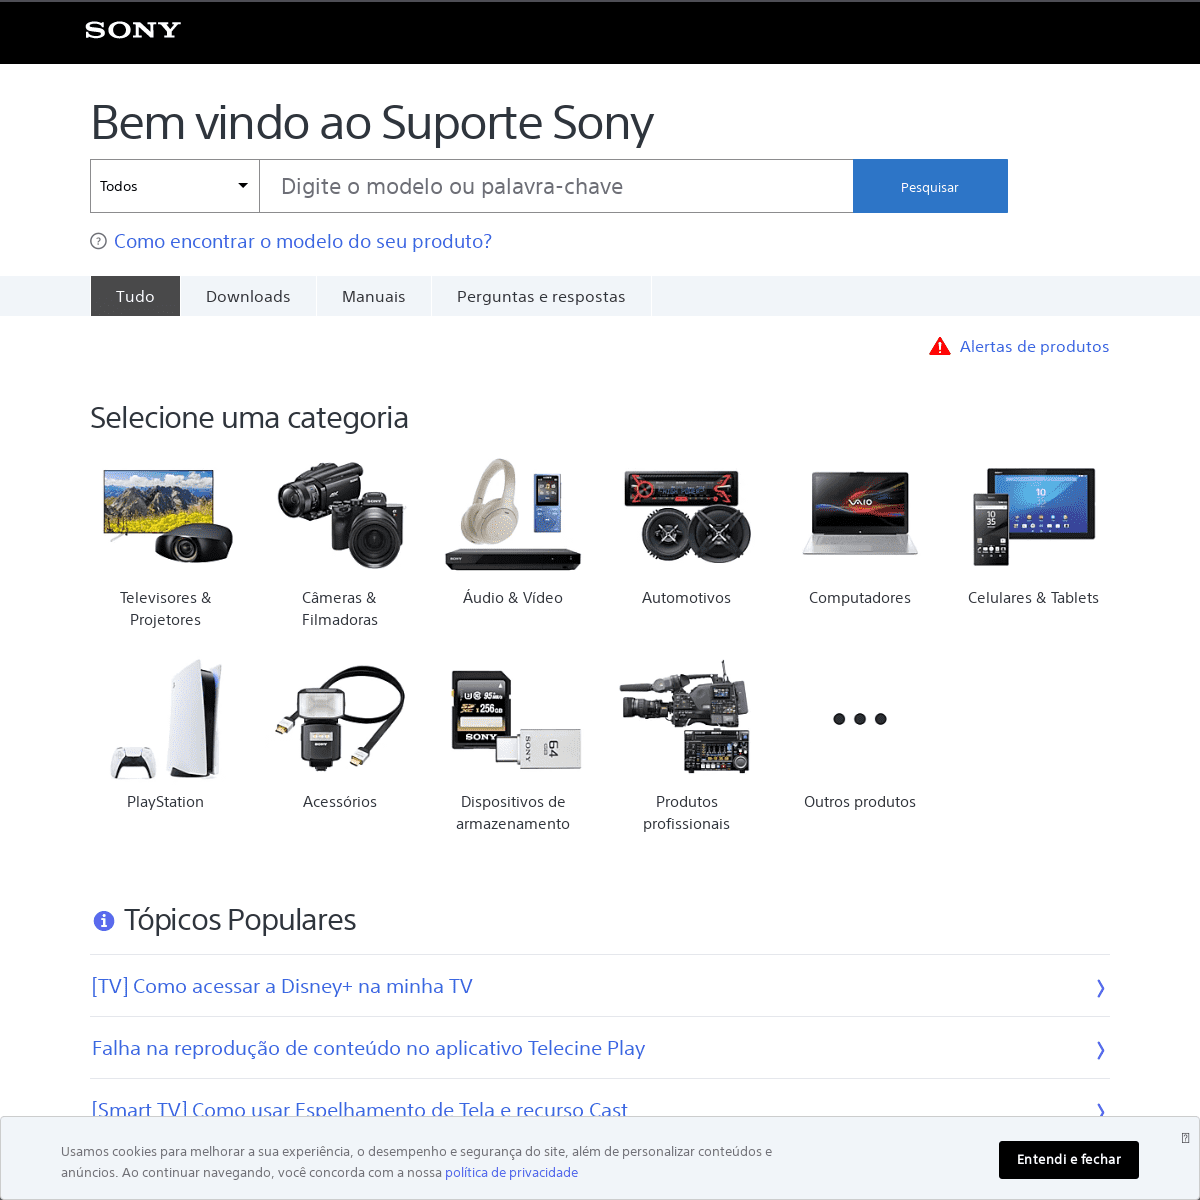 A complete backup of https://sony.com.br